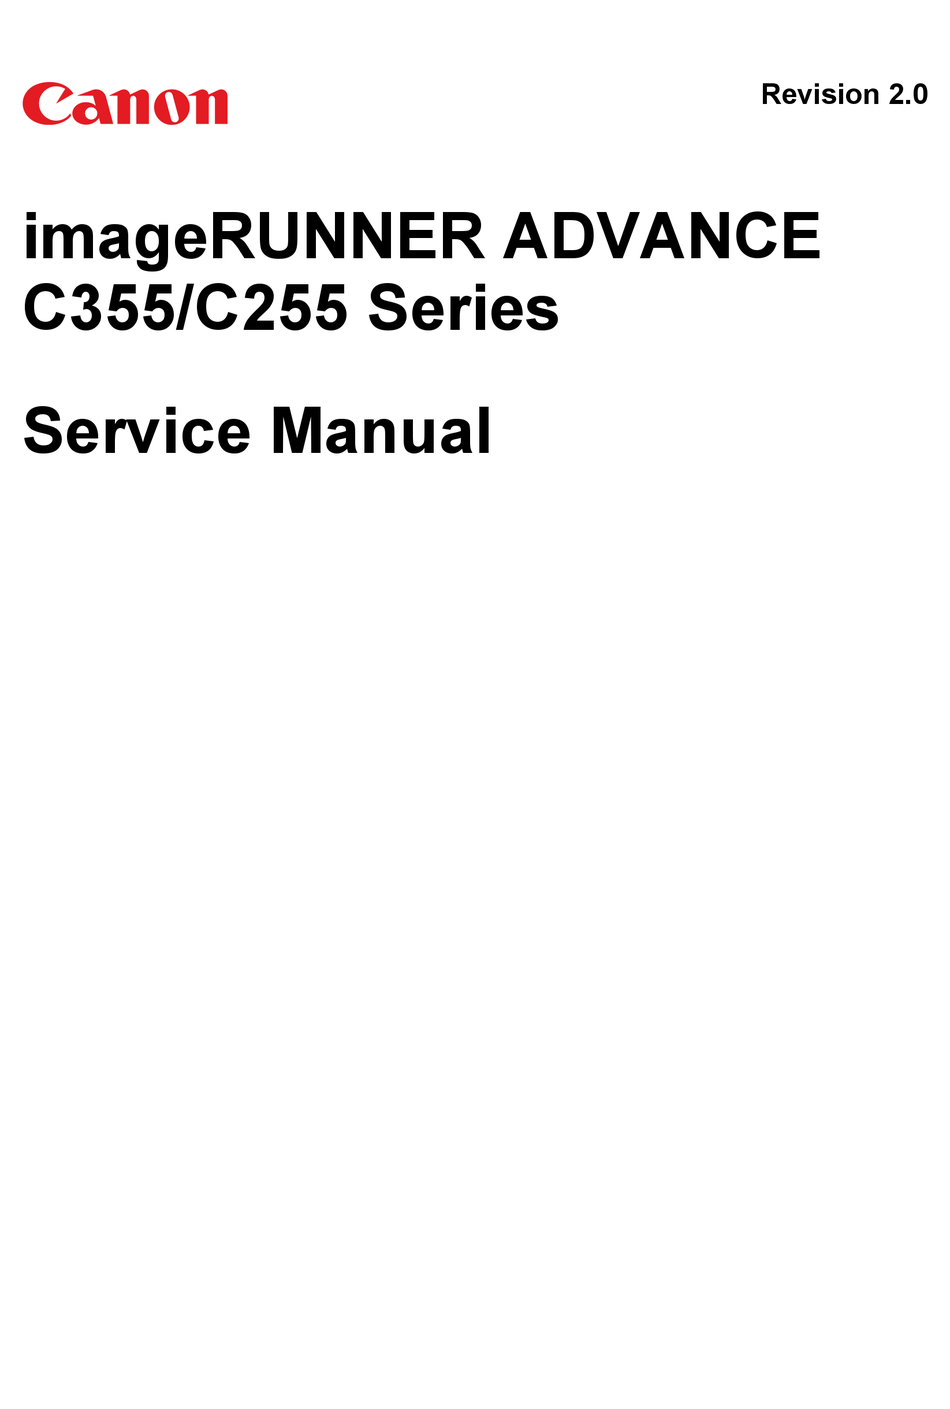 canon imagerunner advance c2225 driver download